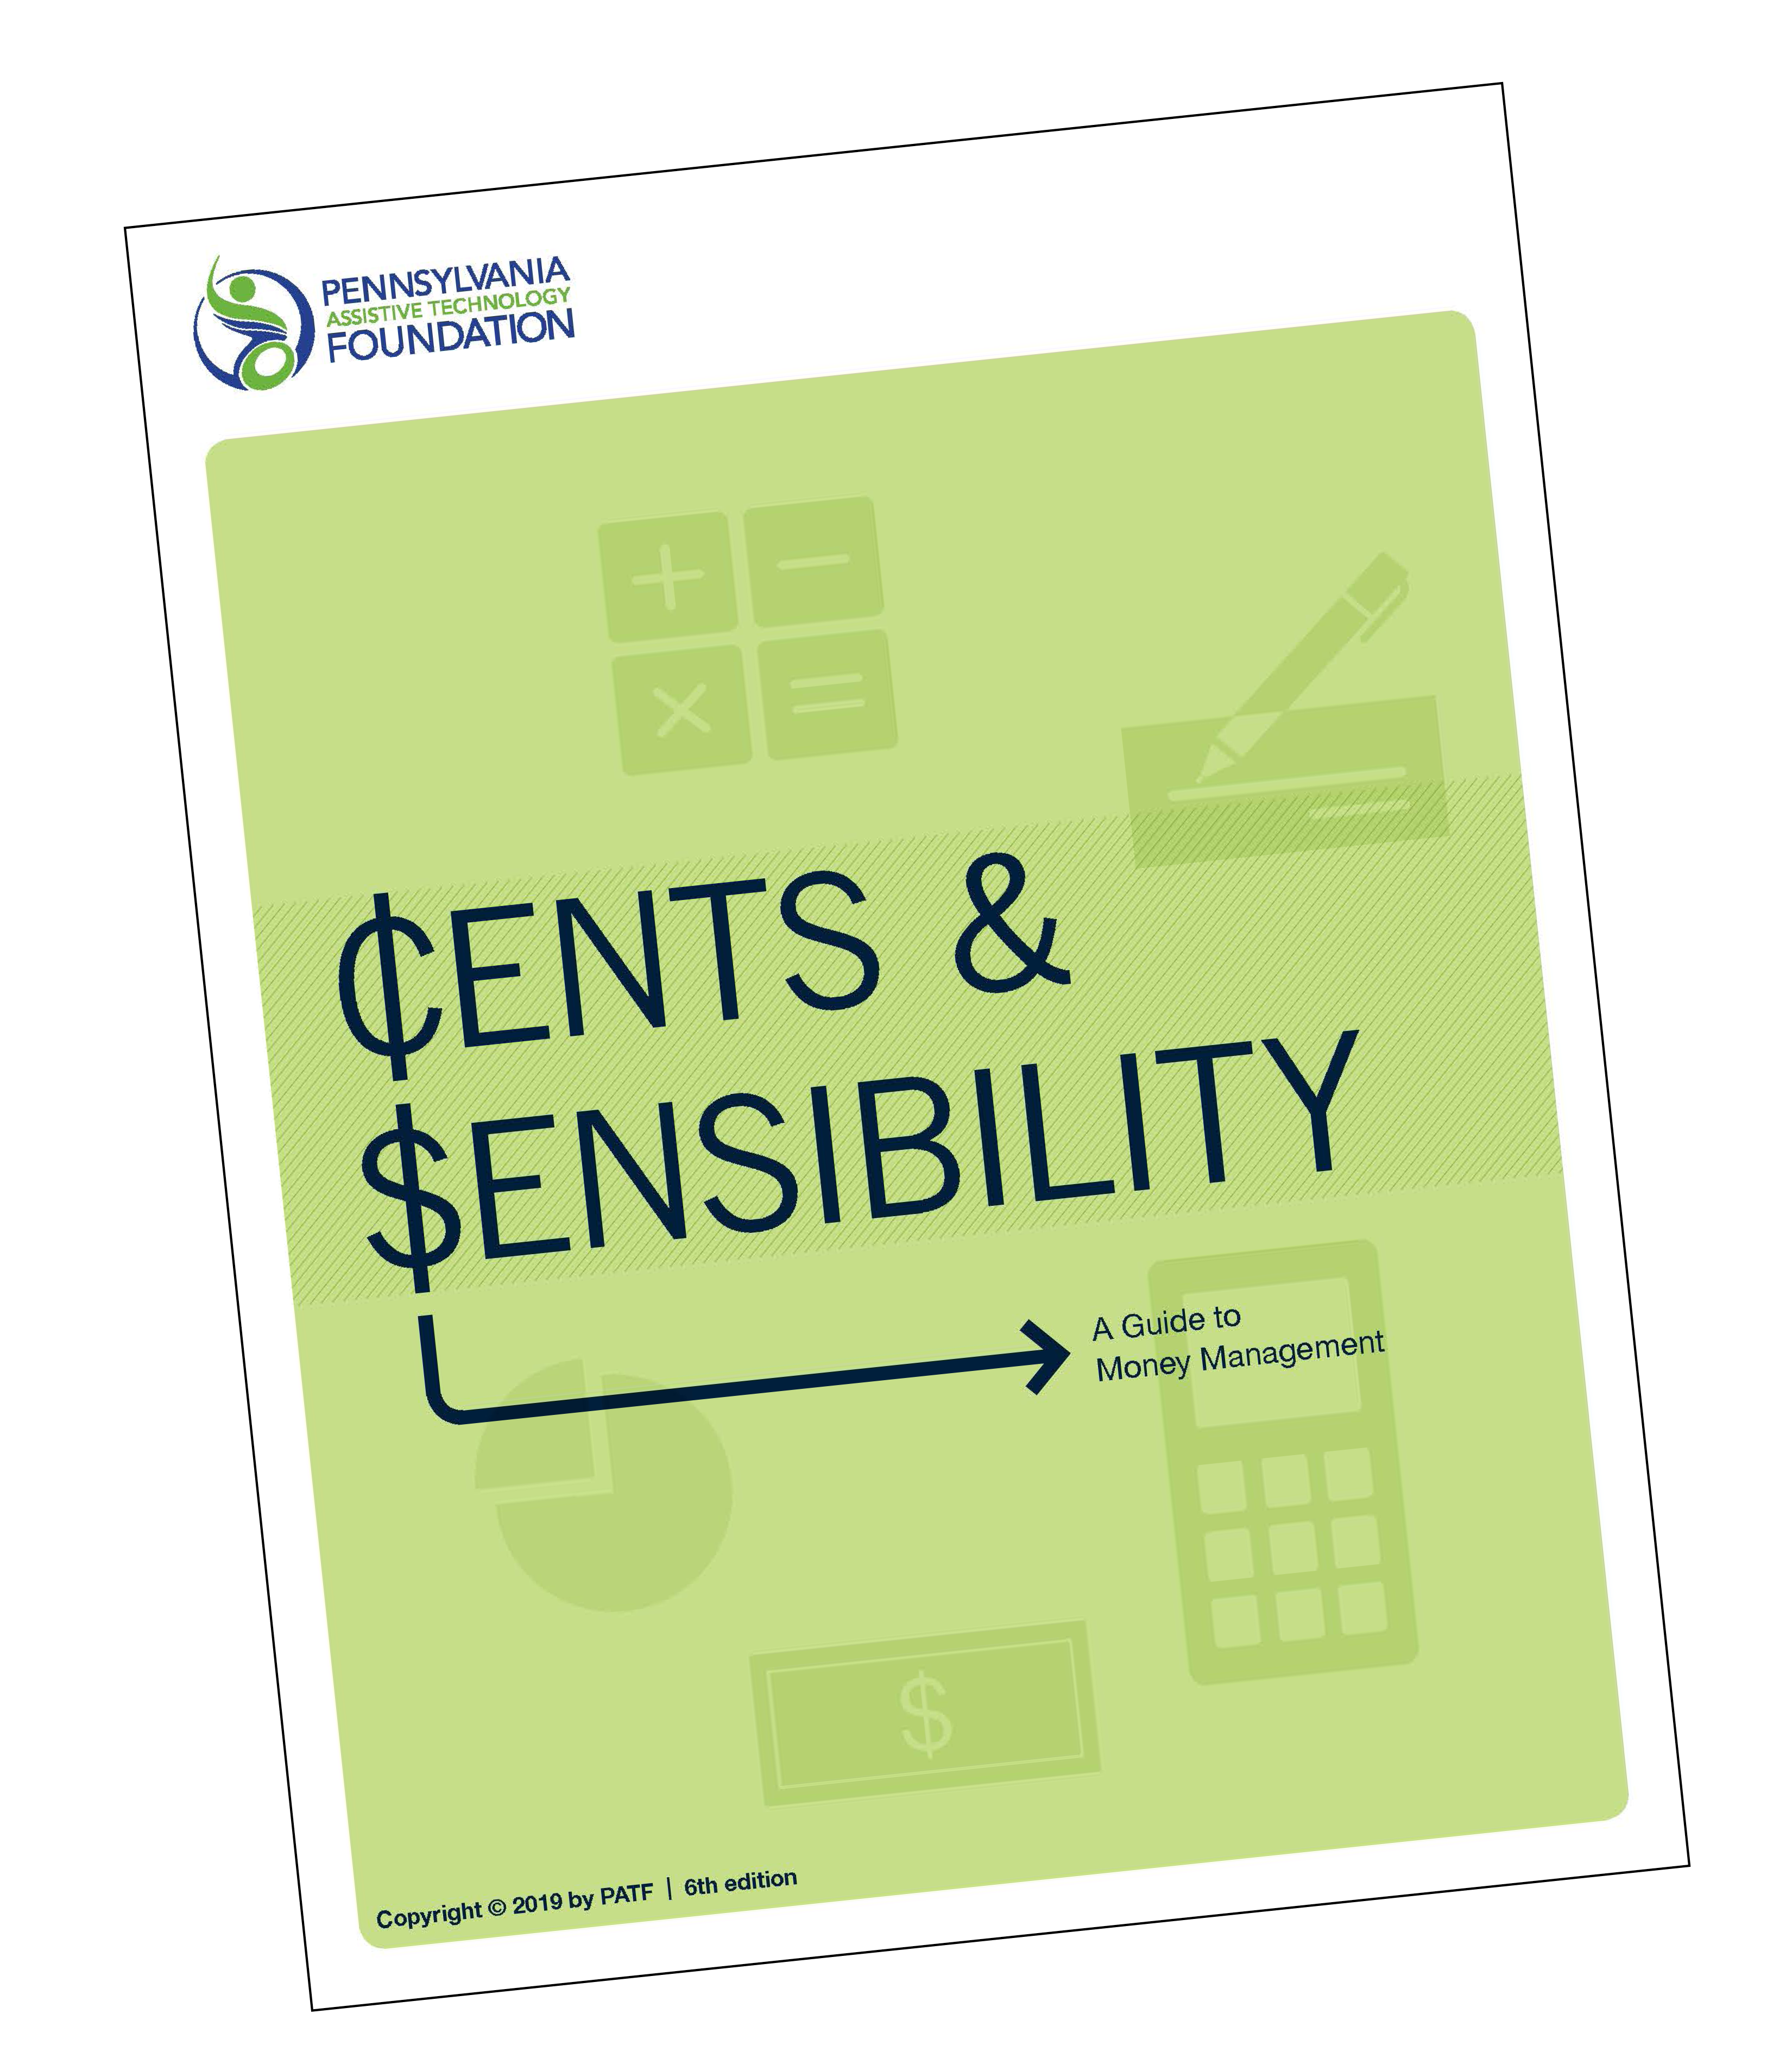 Cover of the book titled Cents and Sensibility.